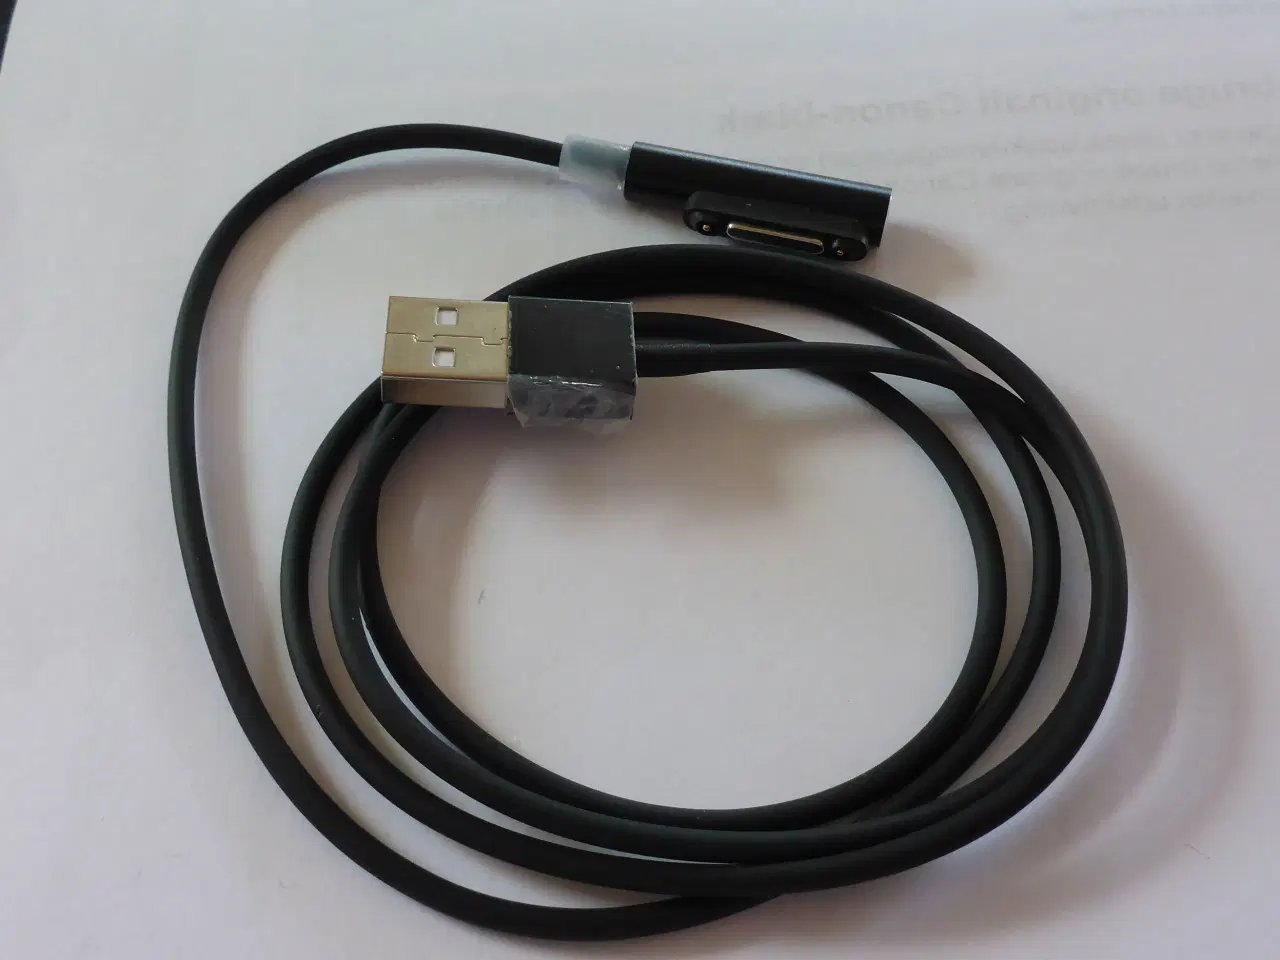 Billede 3 - Kabel, t. Sony Ericsson, xperia z3 compact